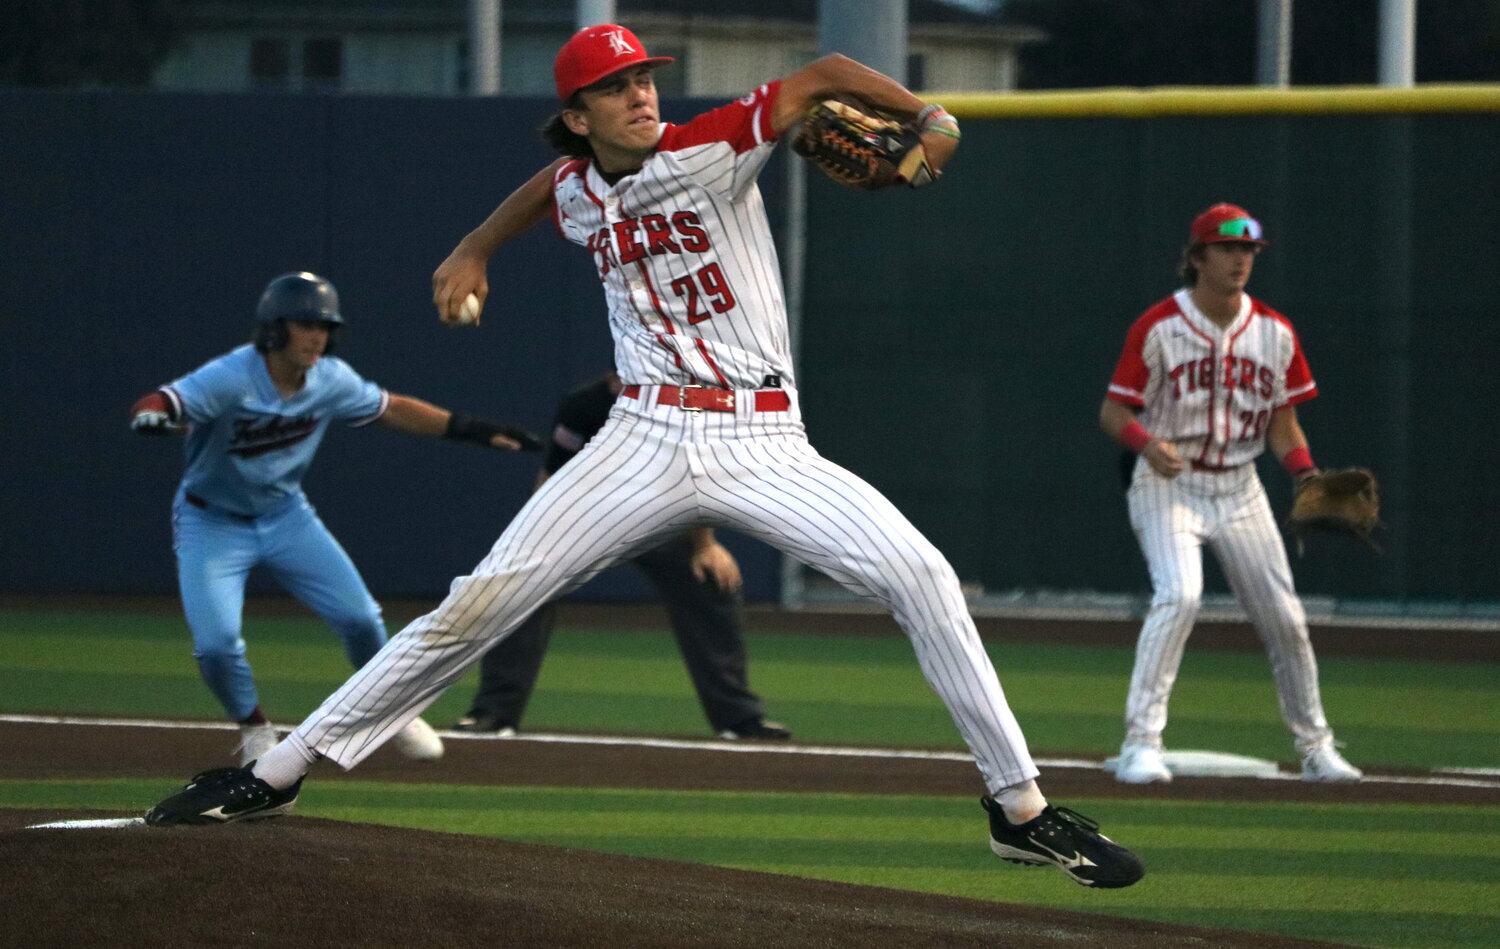 Aaron Brashear pitches during Thursday's Regional Quarterfinal game between Katy and Tompkins at Cy-Springs.